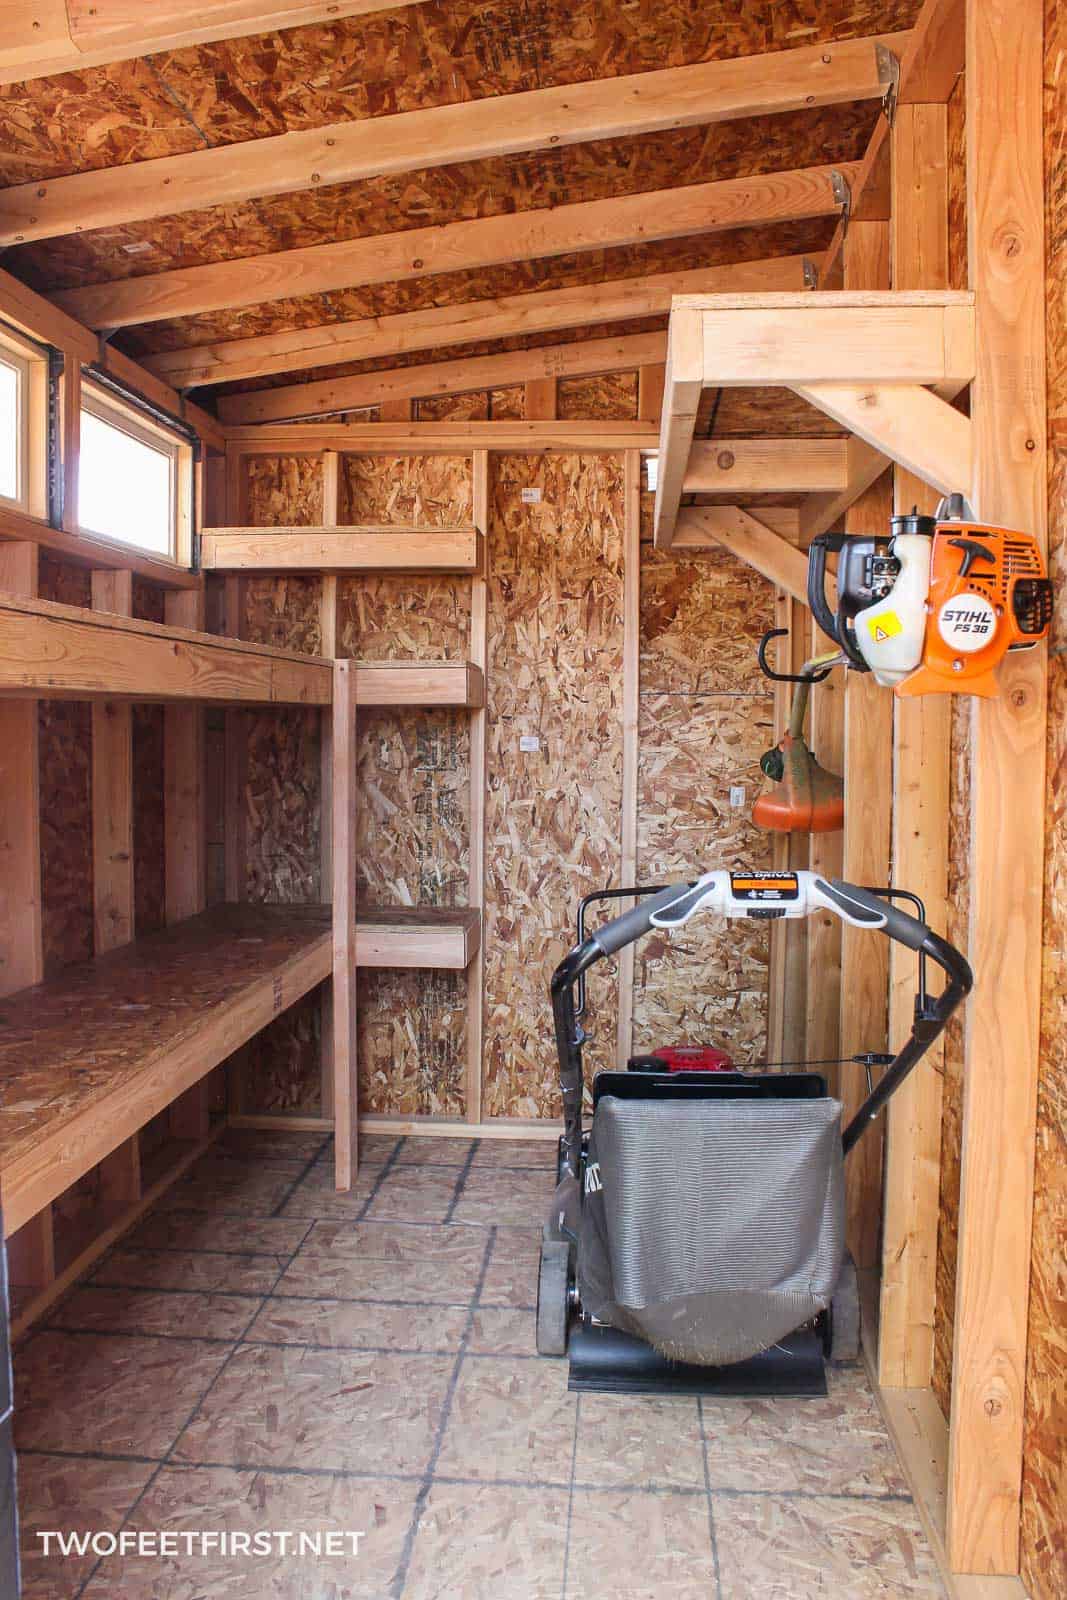 How To Build Storage Shelves In A Shed, Shelves For Wood Storage